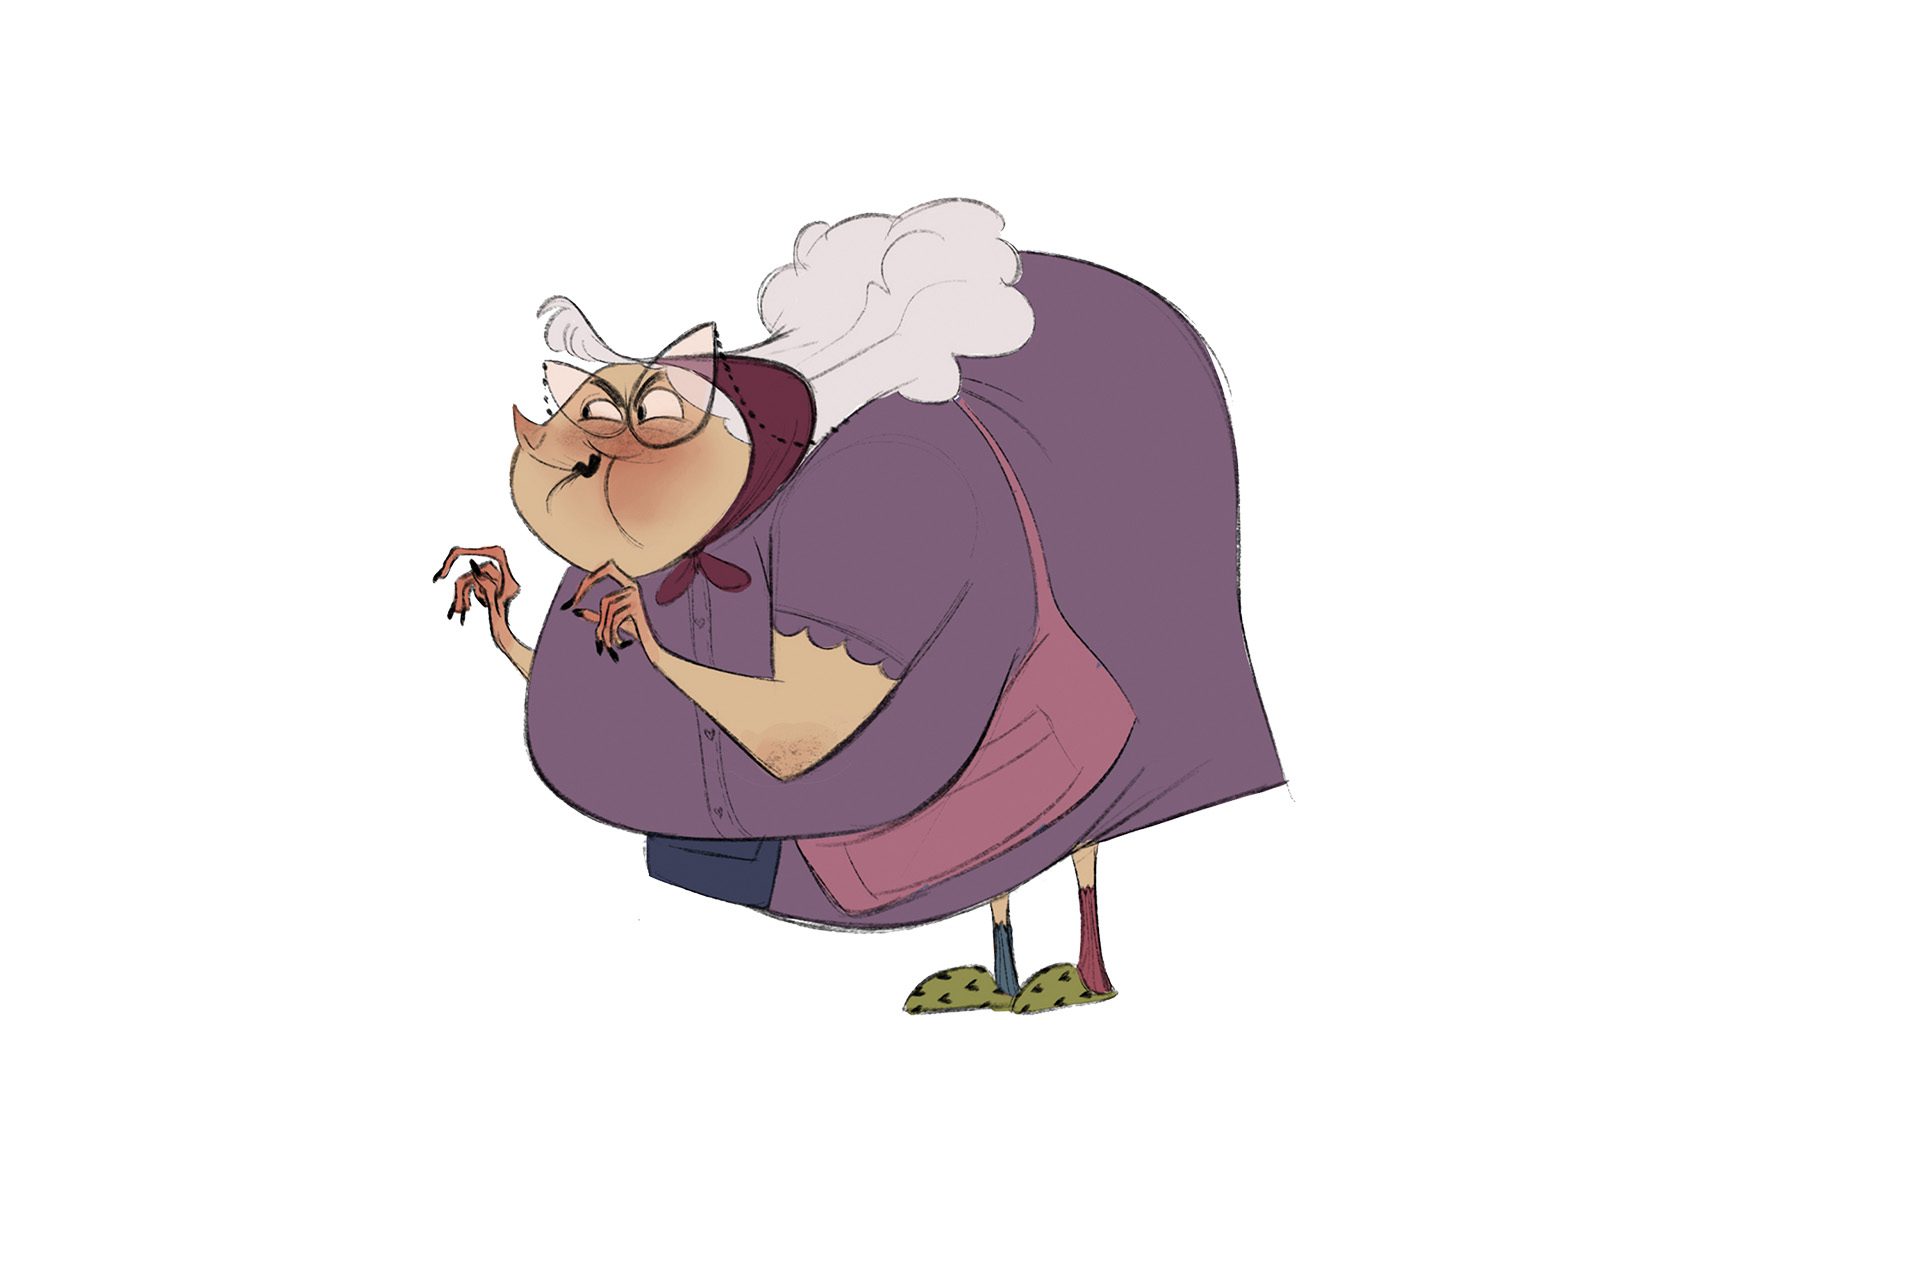 Animation of a wicked old lady with pointed glasses and green slippers.